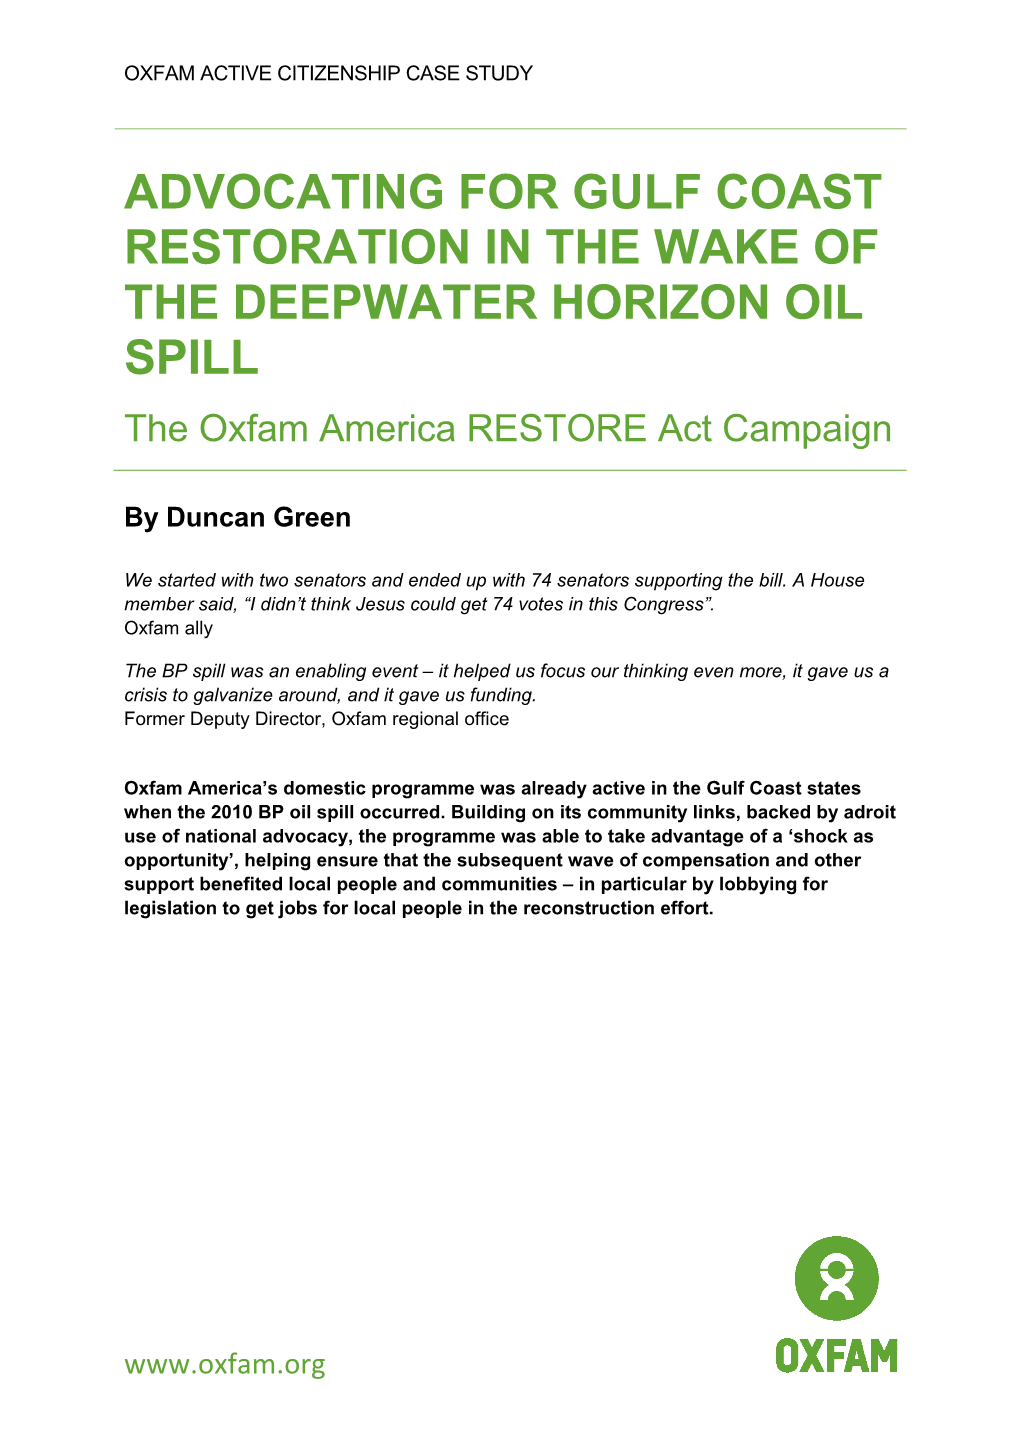 ADVOCATING for GULF COAST RESTORATION in the WAKE of the DEEPWATER HORIZON OIL SPILL the Oxfam America RESTORE Act Campaign